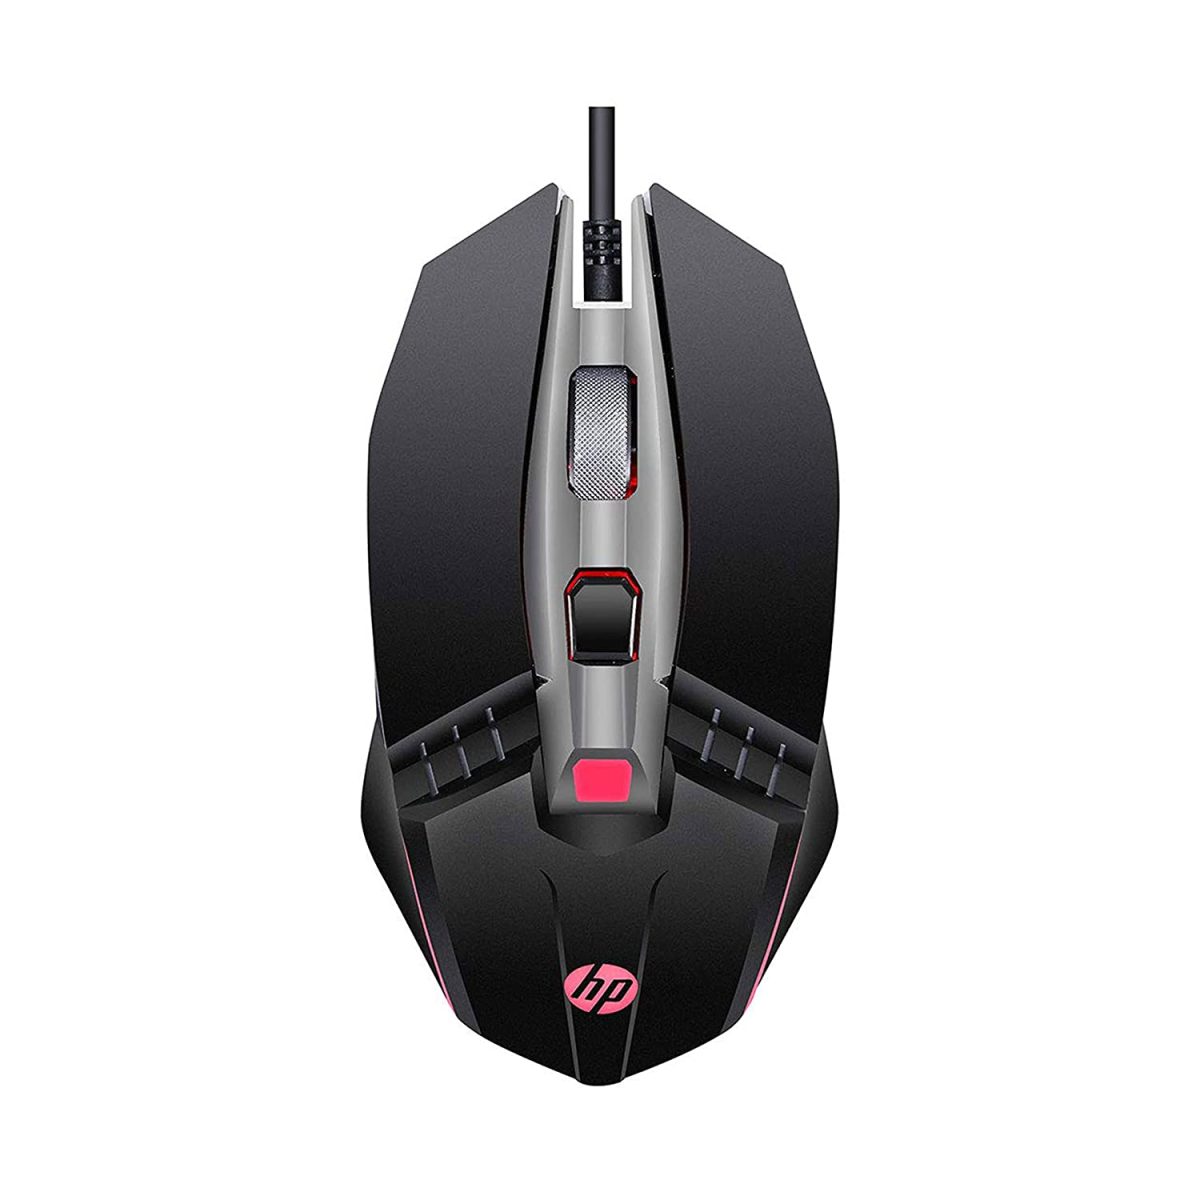 HP M270 Backlit USB Wired Gaming Mouse with 6 Buttons, 4-Speed Customizable 2400 DPI